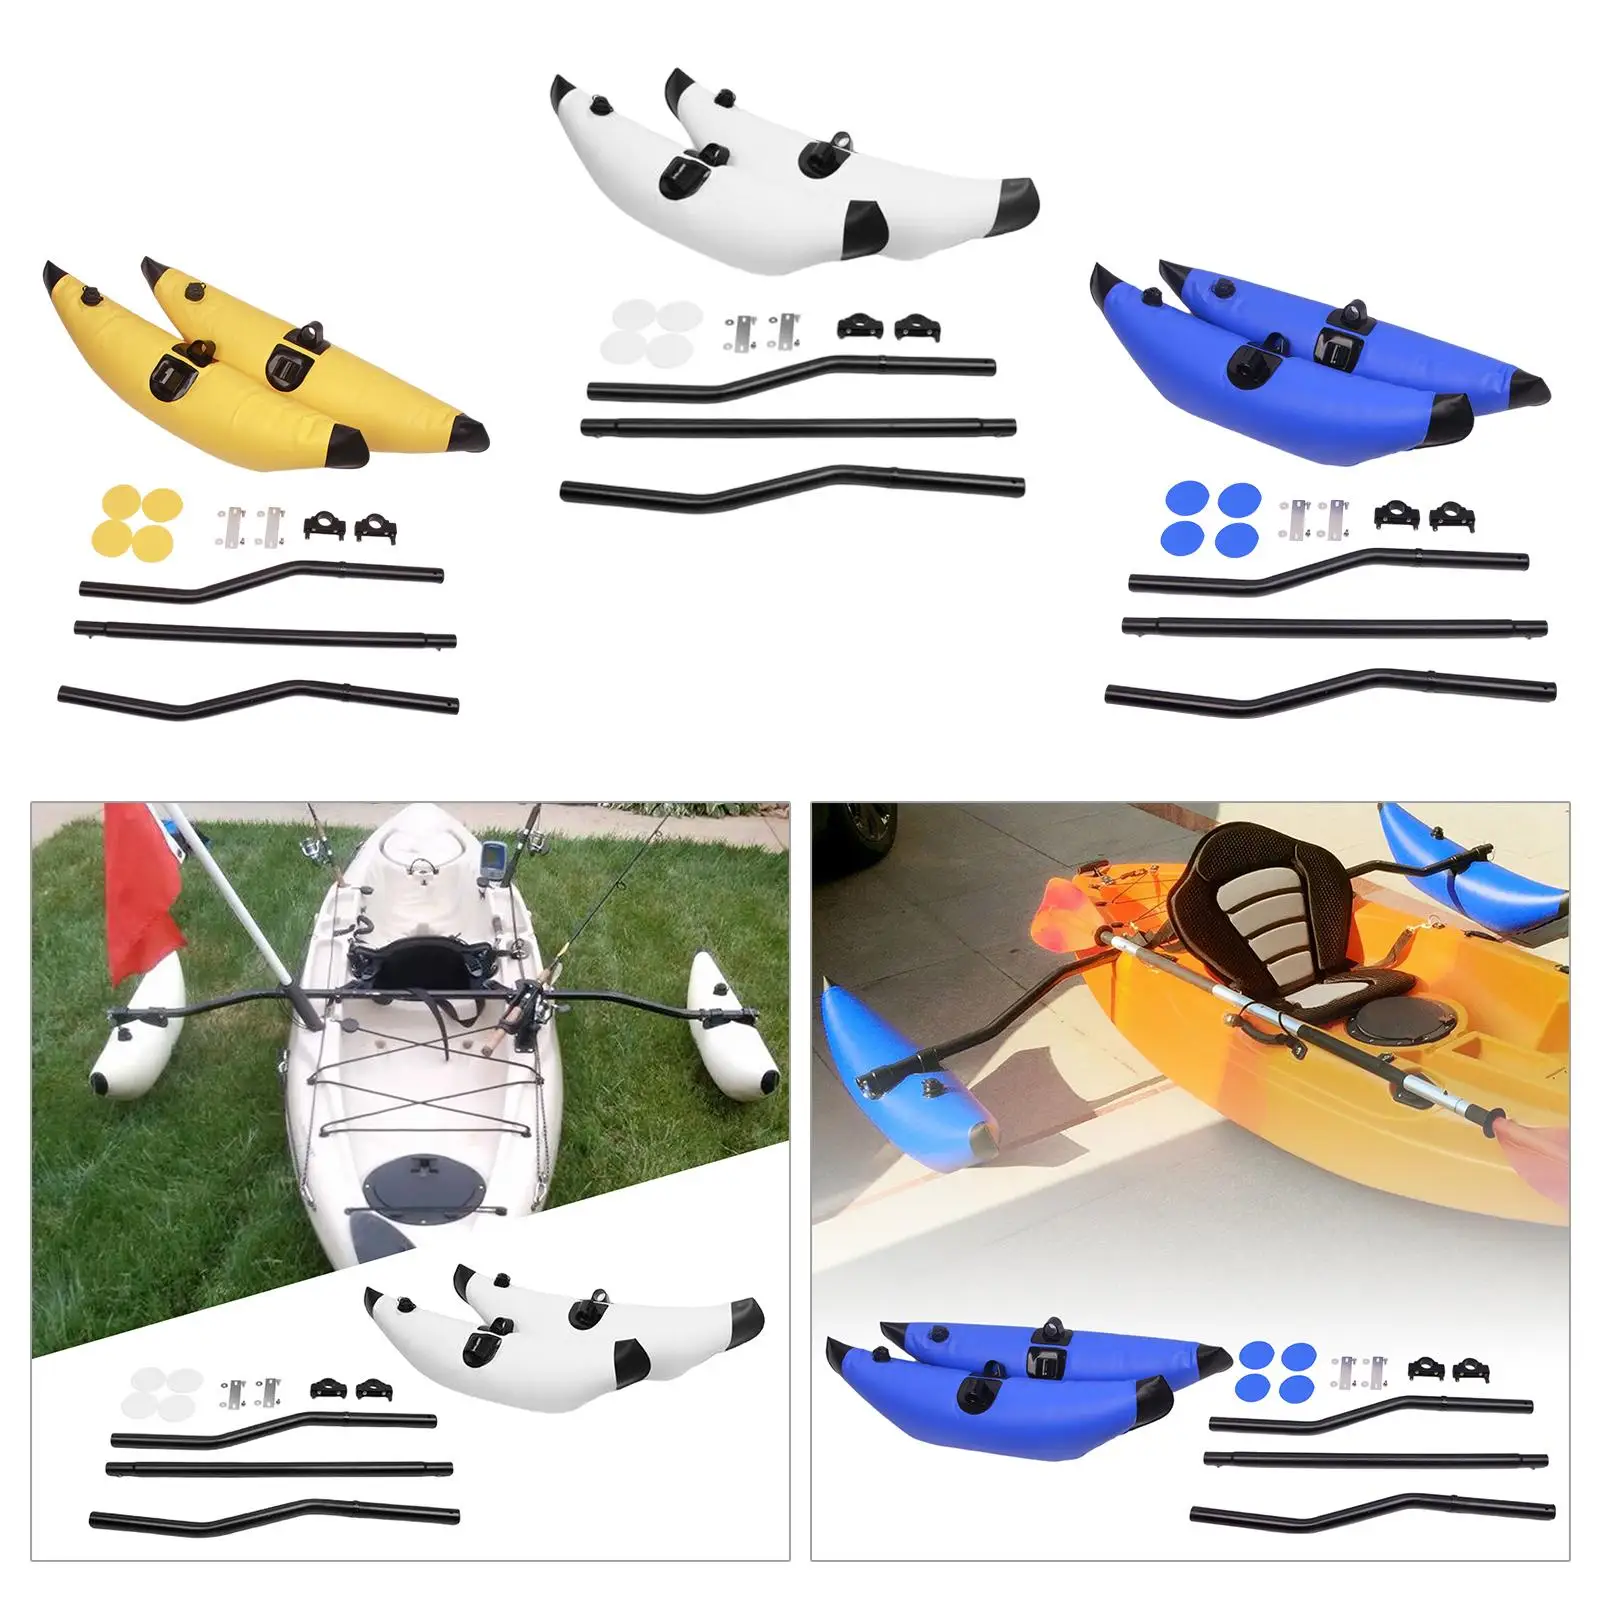 PVC Kayak Stabilization System  Arms Standing Ocean Going Boats